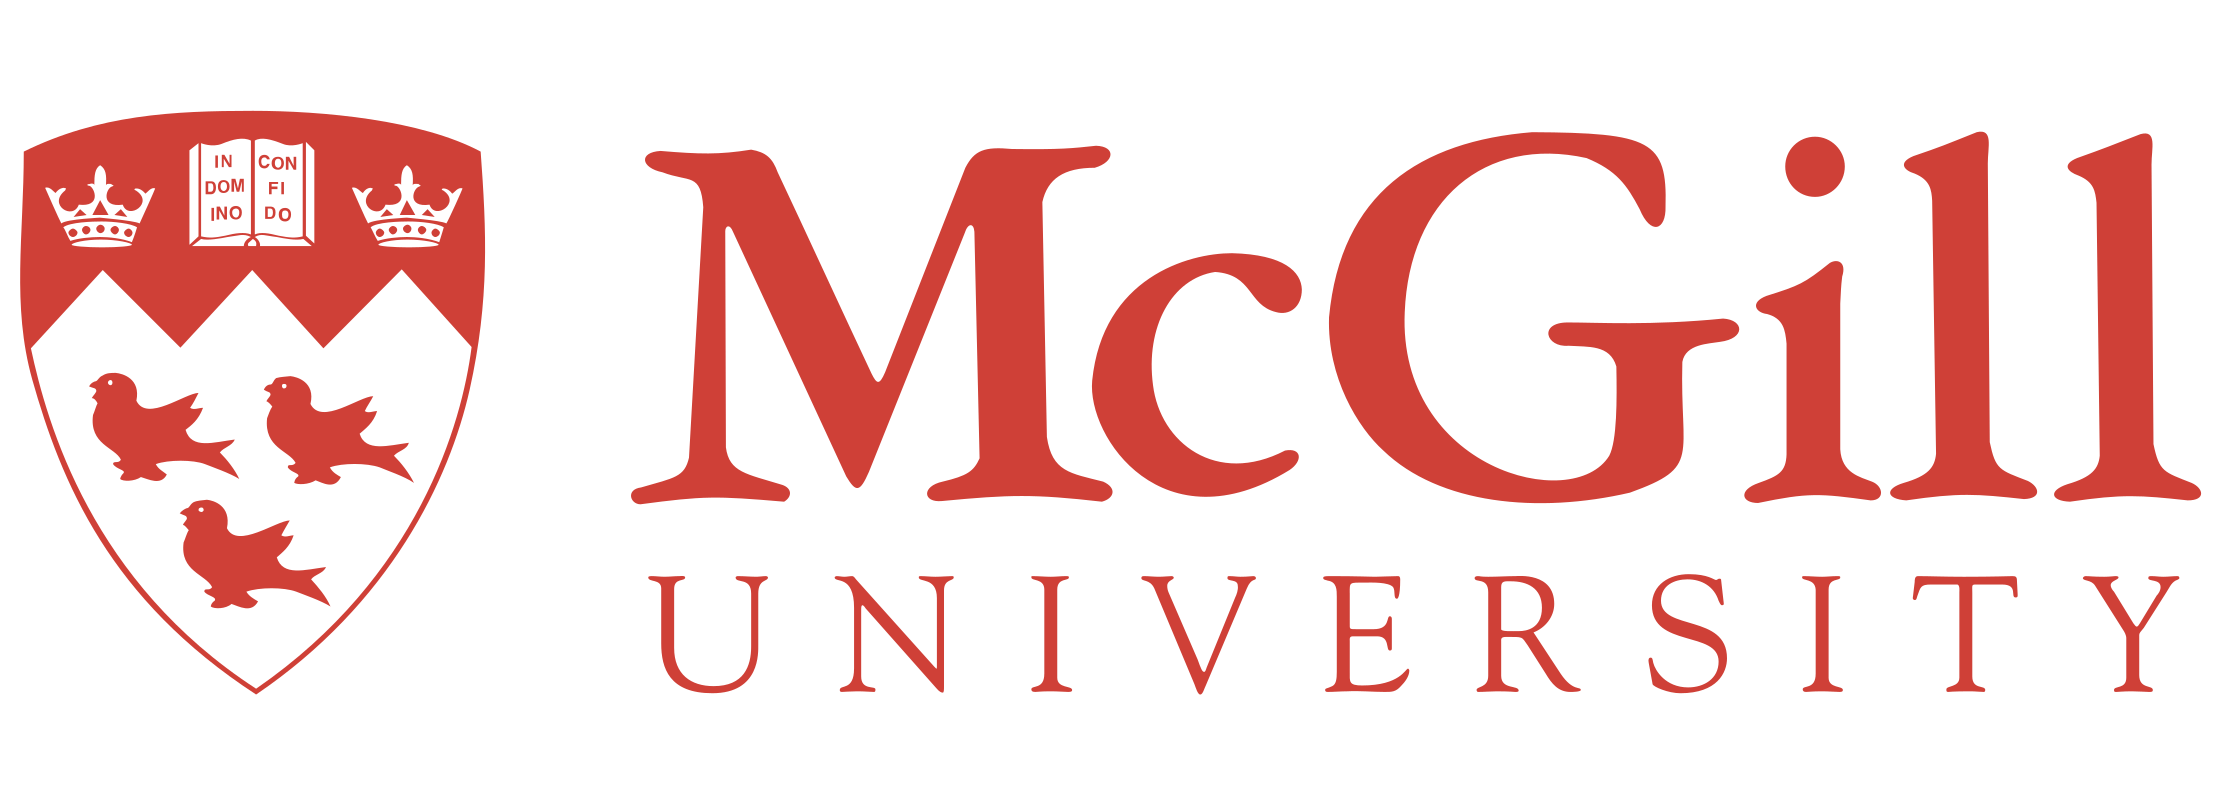 Investment Management | Bachelor's degree | Business | On Campus | McGill University | Canada